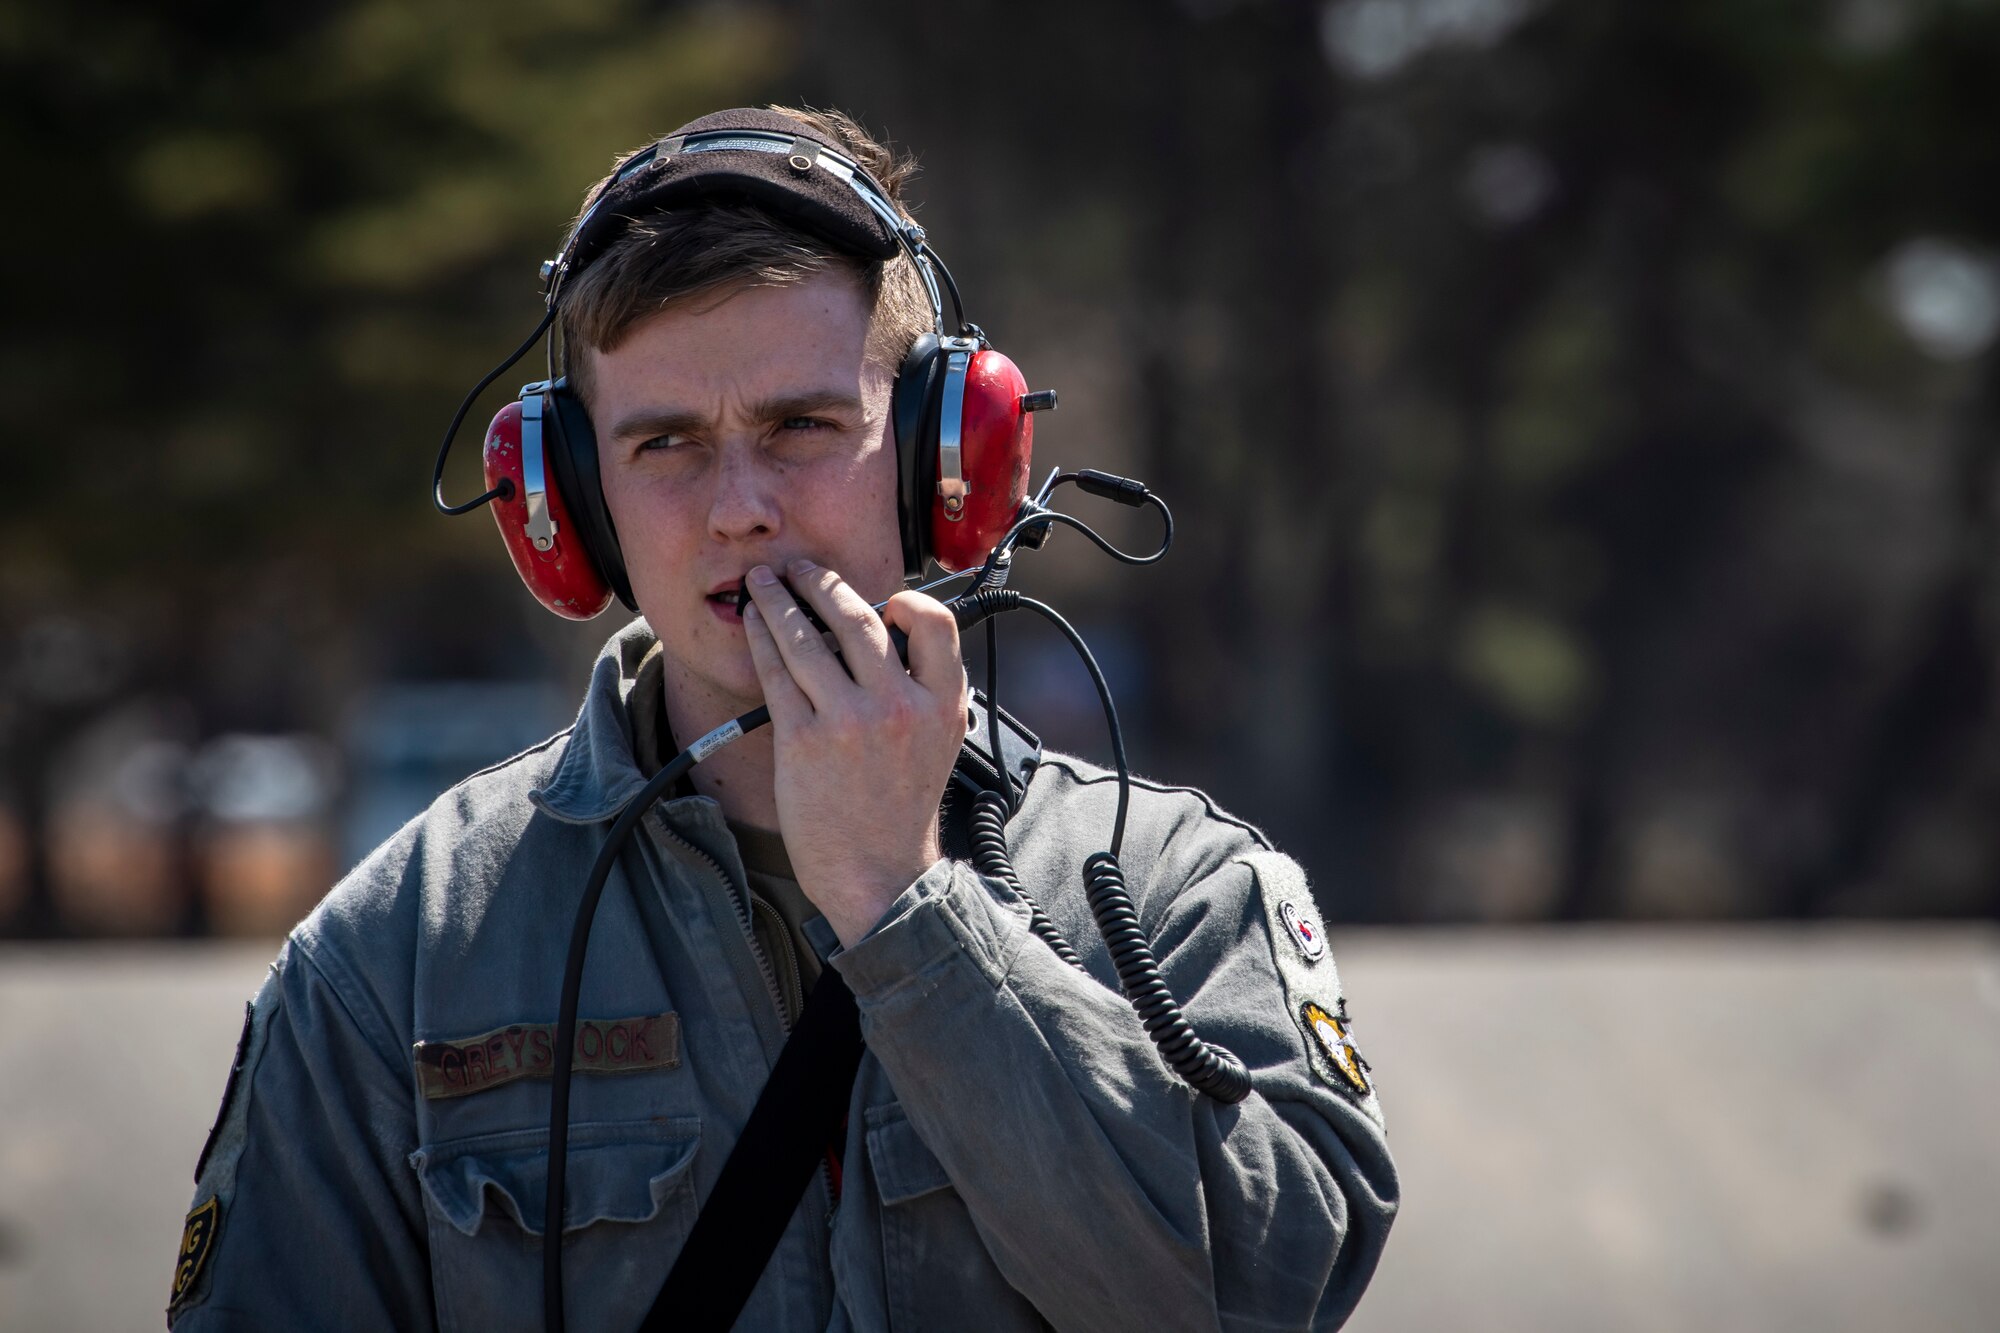 U.S. Air Force Senior Airman Kyle Greyshock, a 13th Fighter Squadron avionics systems journeyman, speaks into a radio headset at Misawa Air Base, Japan, March 30, 2020. Avionics specialists require attention to detail since proper maintenance can mean the difference between mission success and failure. Part of their job consists of helping make quick fixes to jets to ensure they are available for flight. (U.S. Air Force photo by Airman 1st Class China M. Shock)